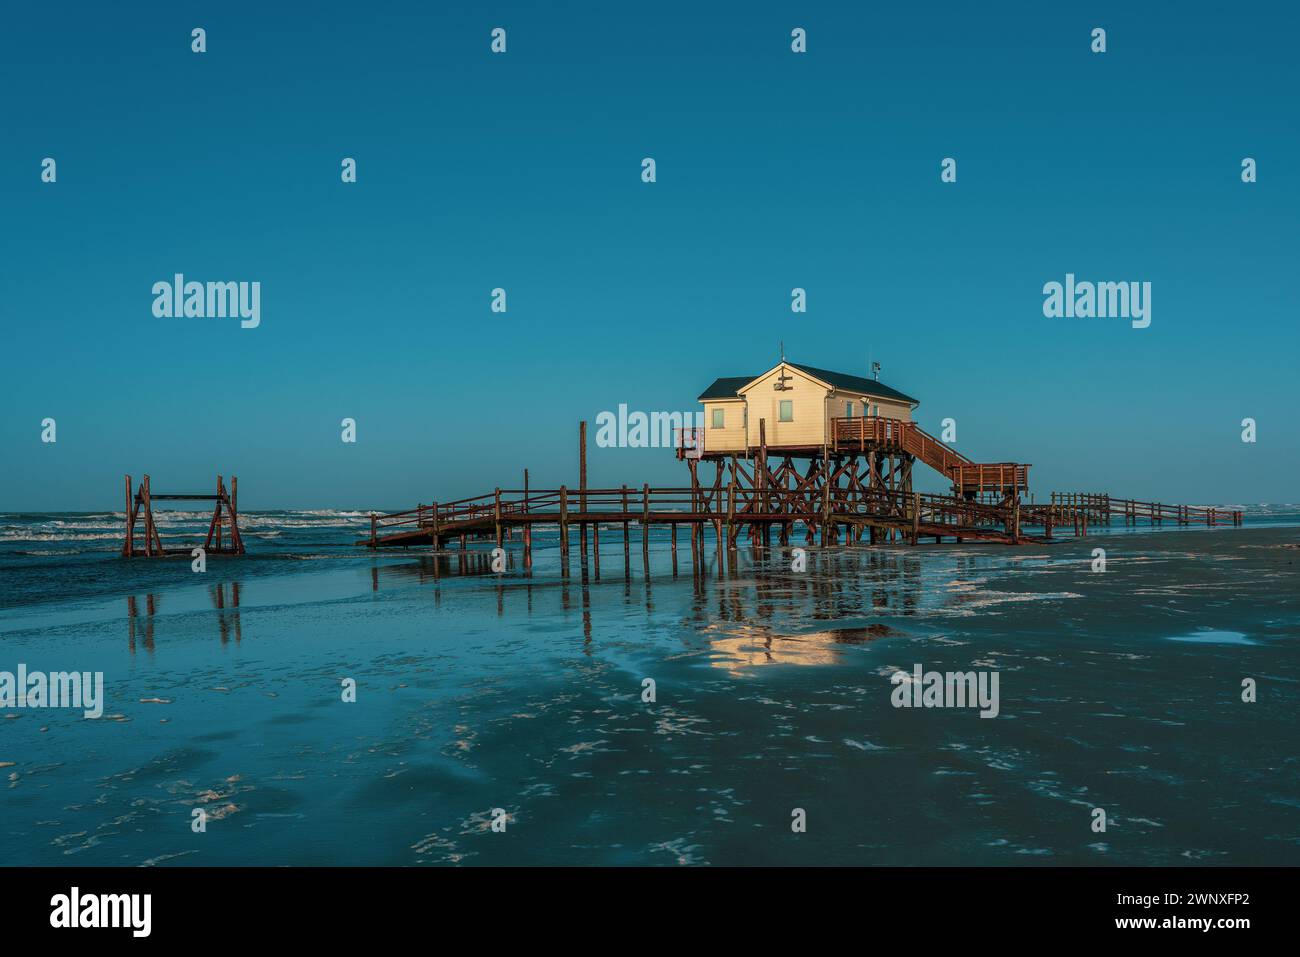 Pile dwelling on the beach of Sankt Peter-Ording in Germany. Stock Photo